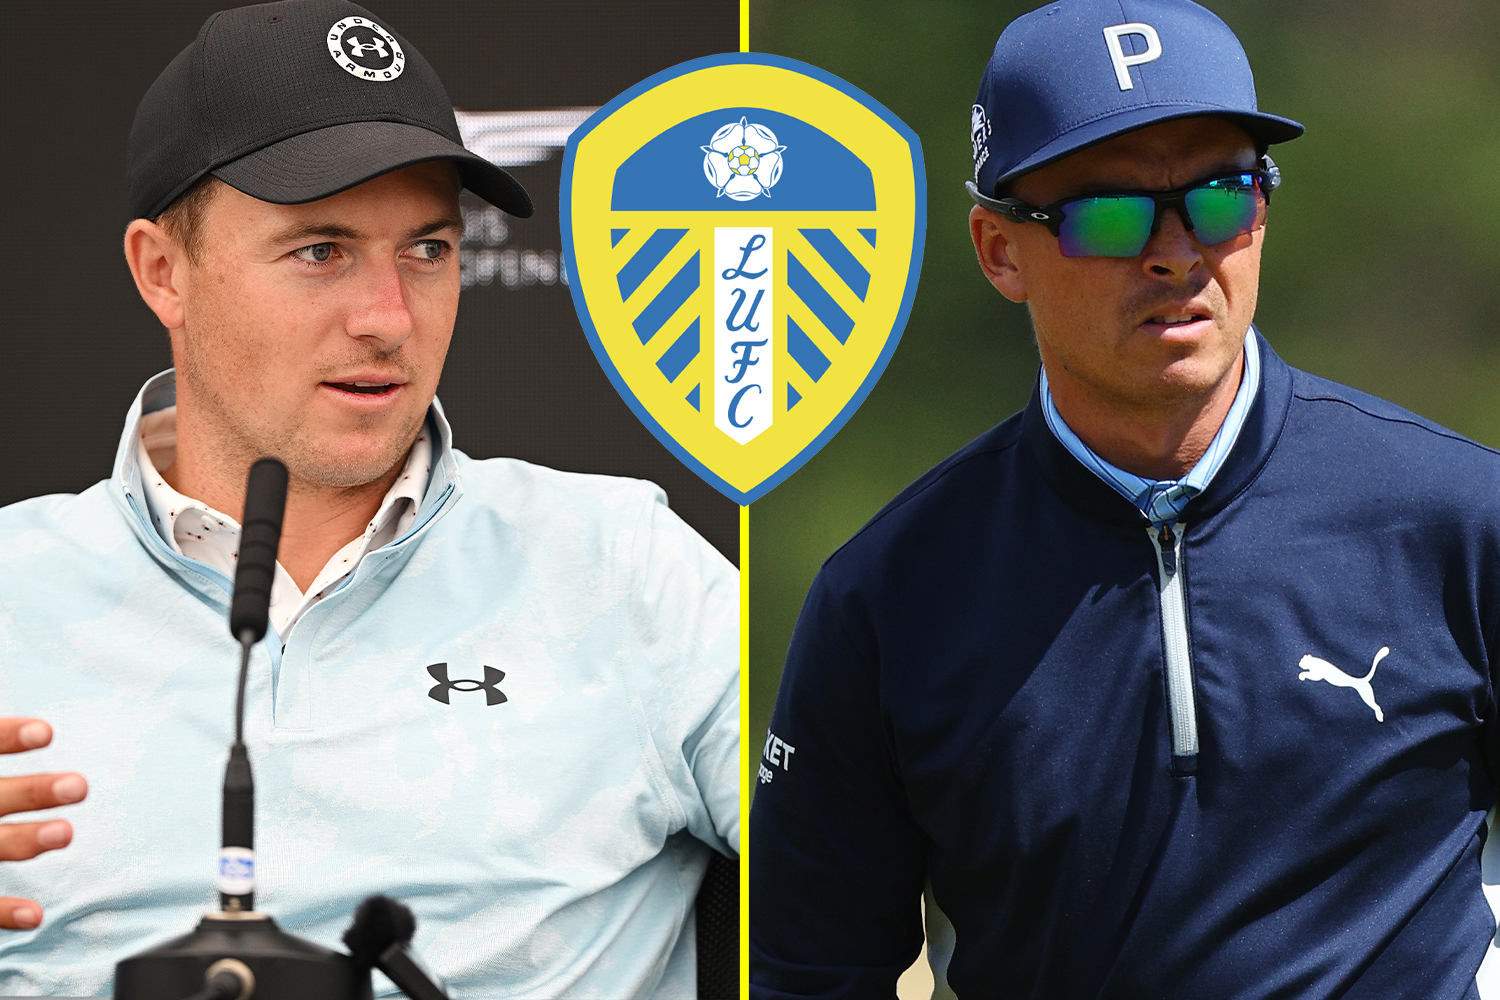 Jordan Spieth says Leeds investment is 'done' but Rickie Fowler pulled out after Premier League relegation